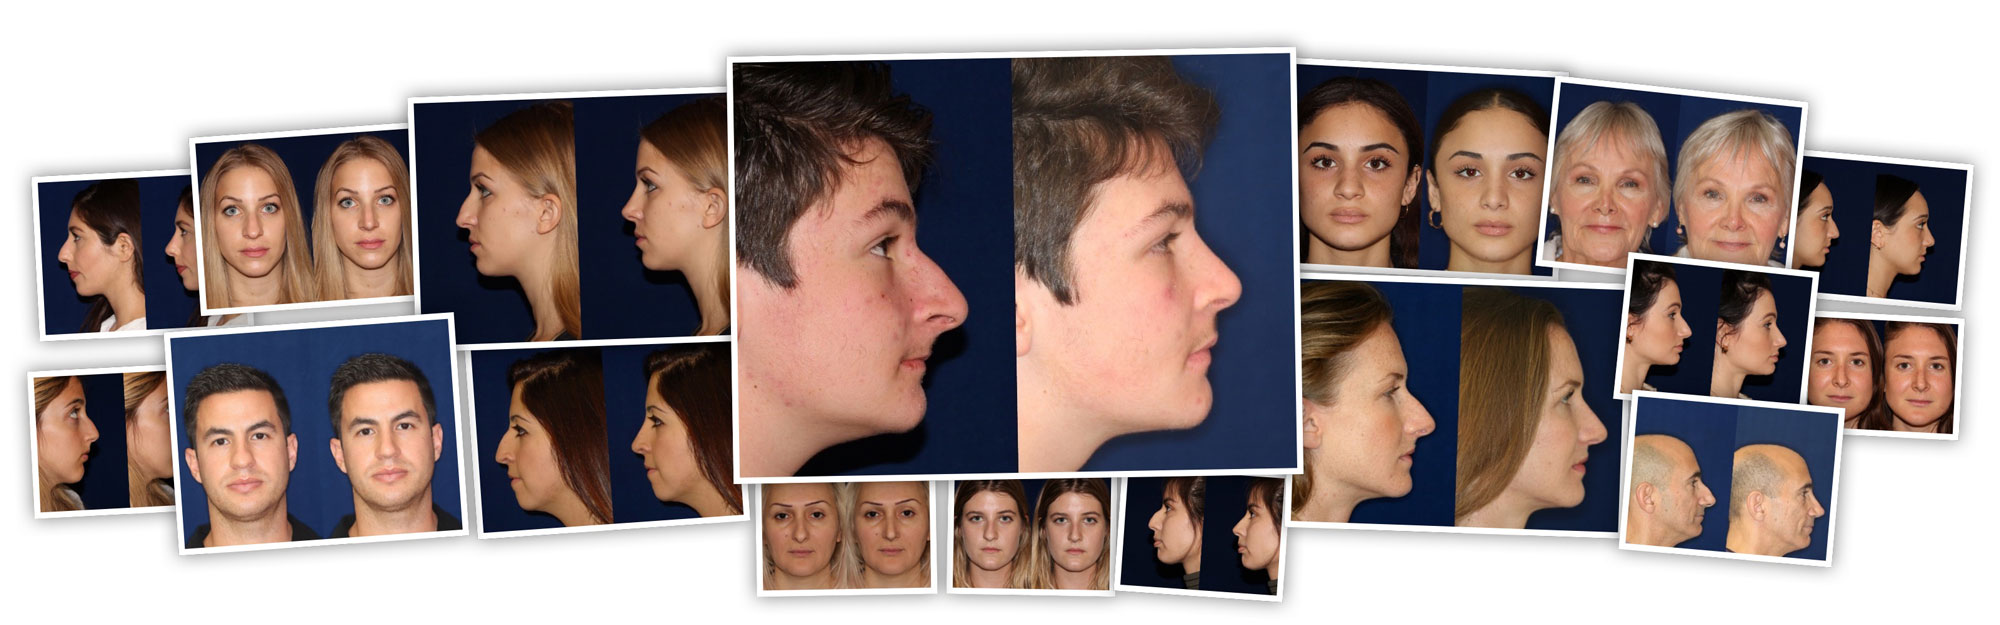 Beverly Hills Rhinoplasty Before and After Photos